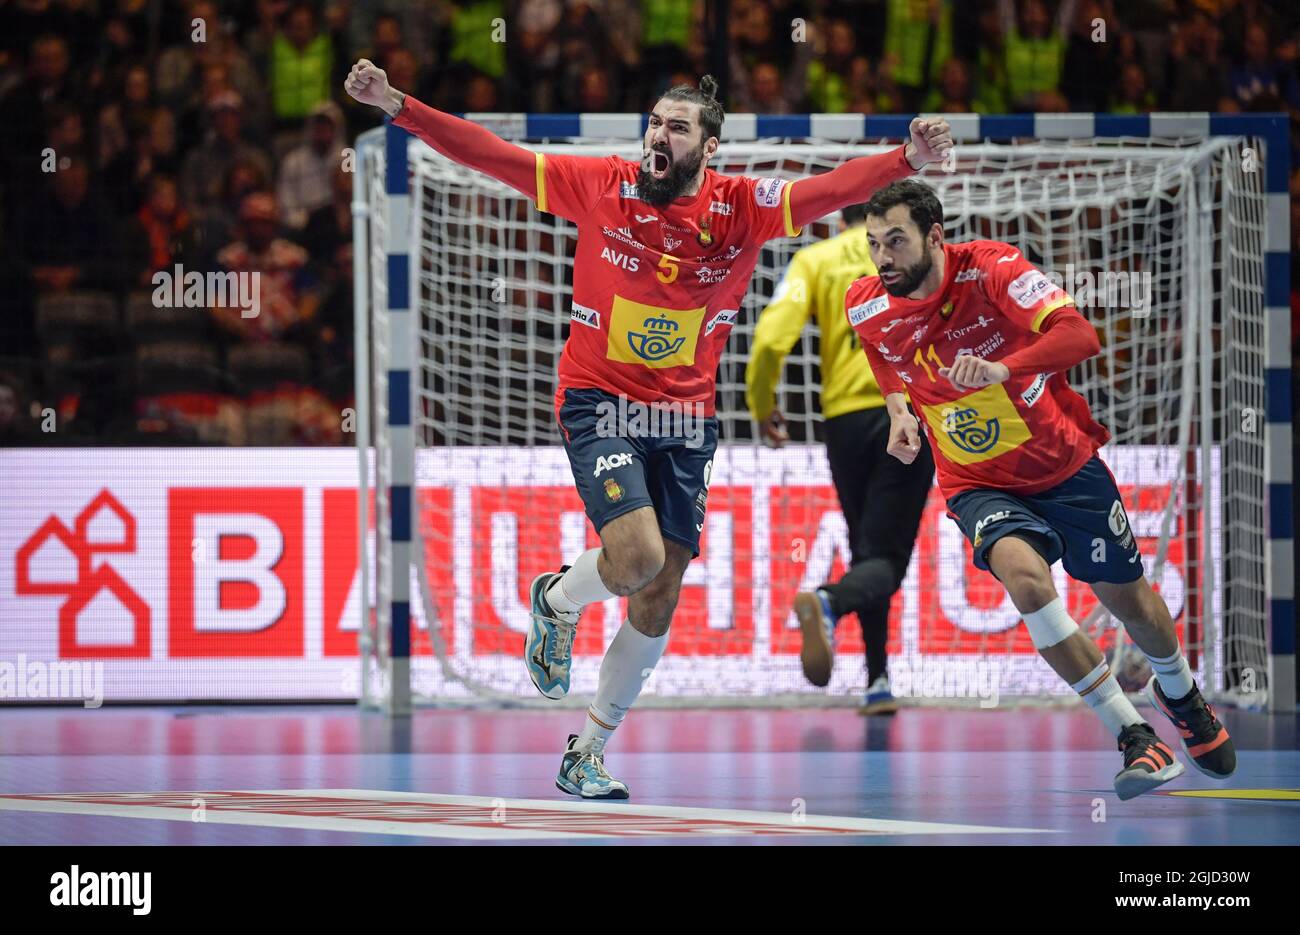 Spain's Jorge Maqueda Pena celebrates a goal with Daniel Sarmiento Melian  during the Men's European Handball Championship final match between Spain  and Croatia in Stockholm, Sweden, on Jan. 26, 2020. Photo: Anders